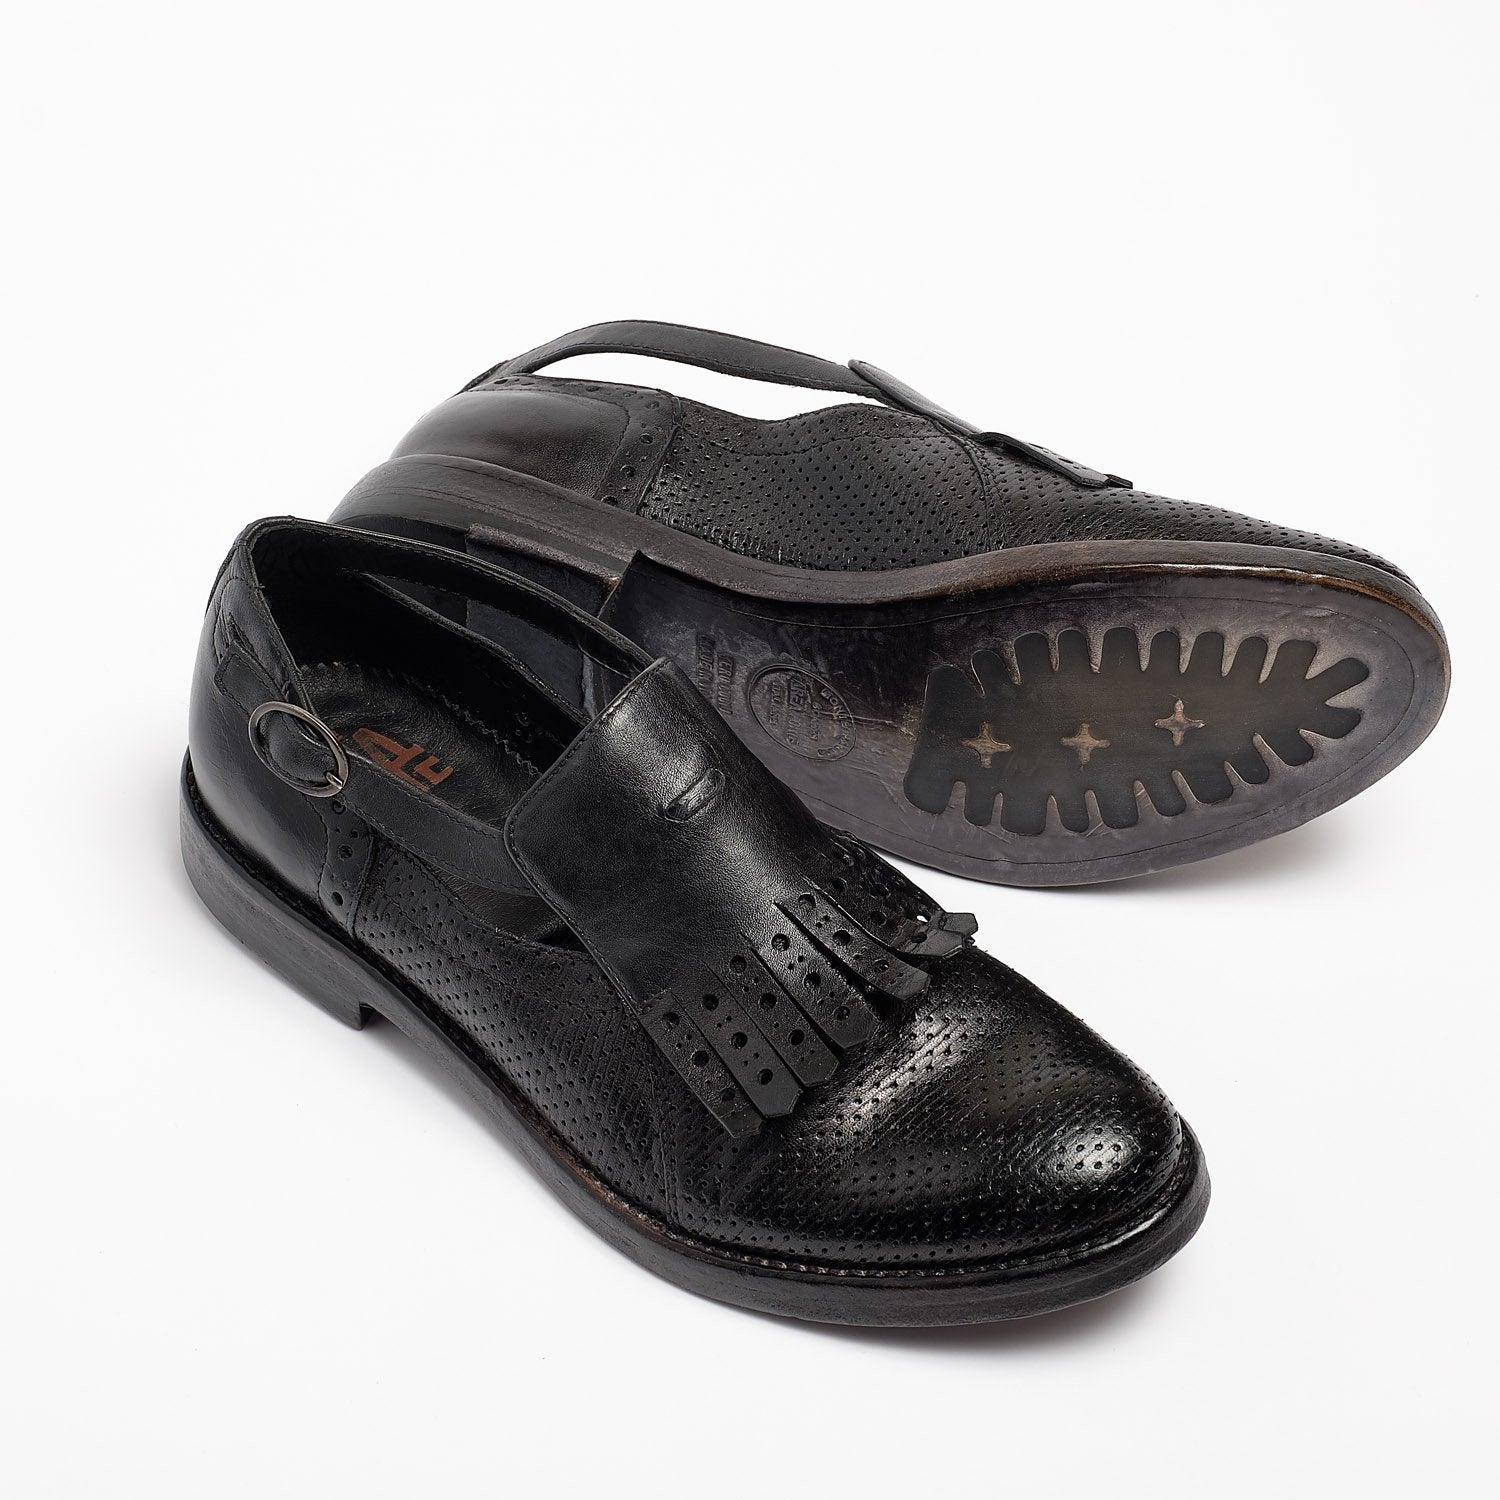 Laverne Buckle side open Shoes perforated natural vacchetta leather black